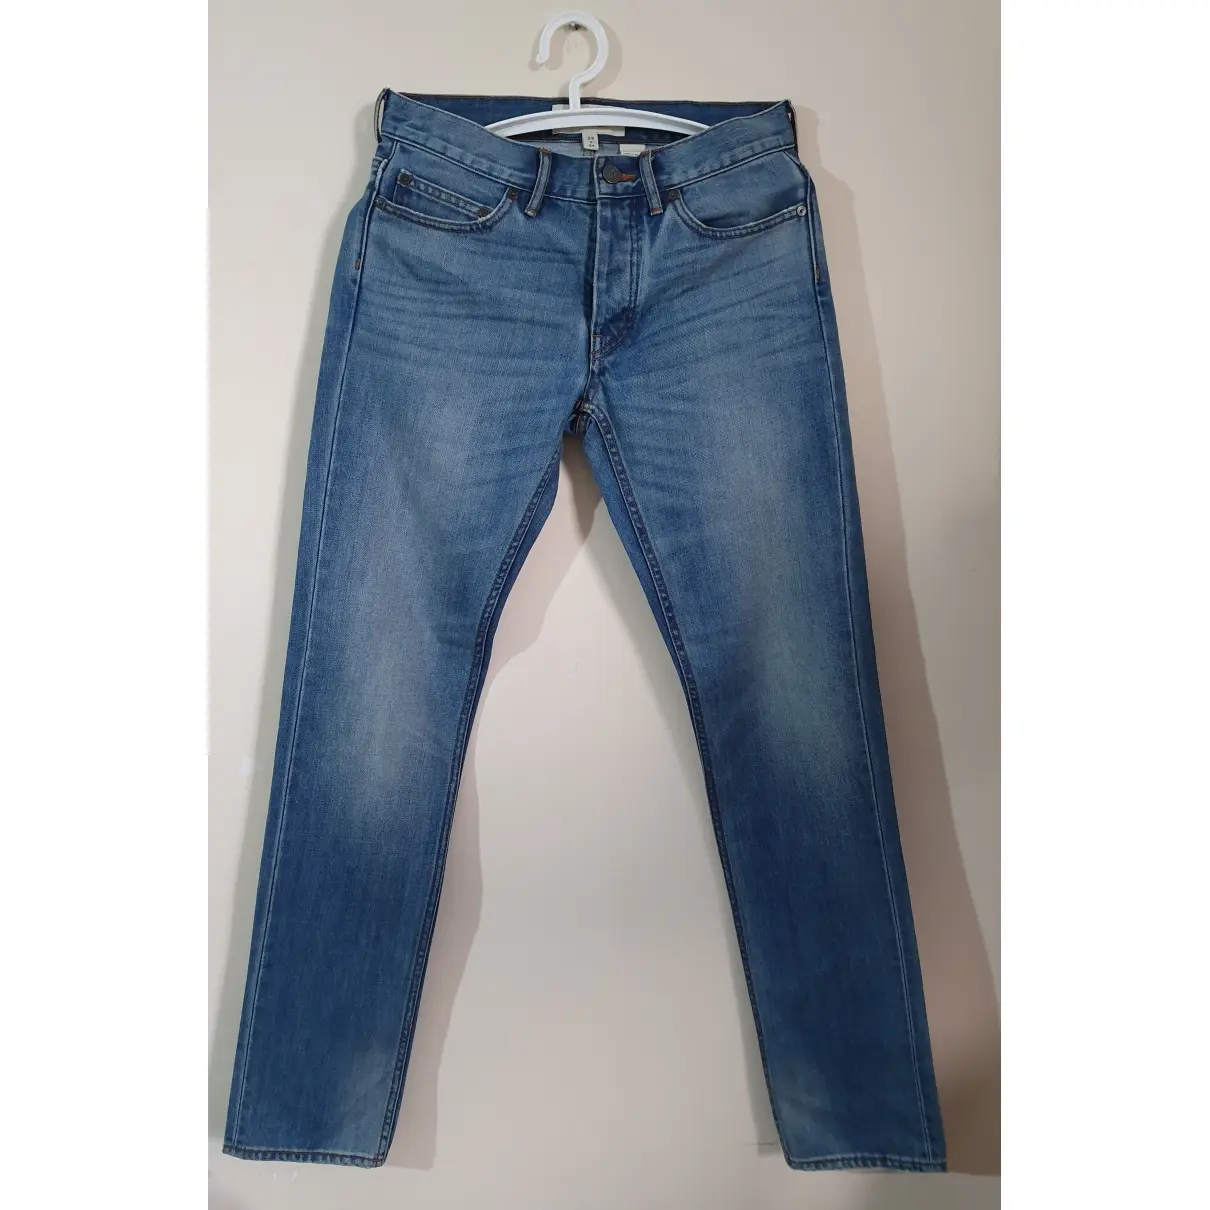 Marc by Marc Jacobs Straight jeans for sale